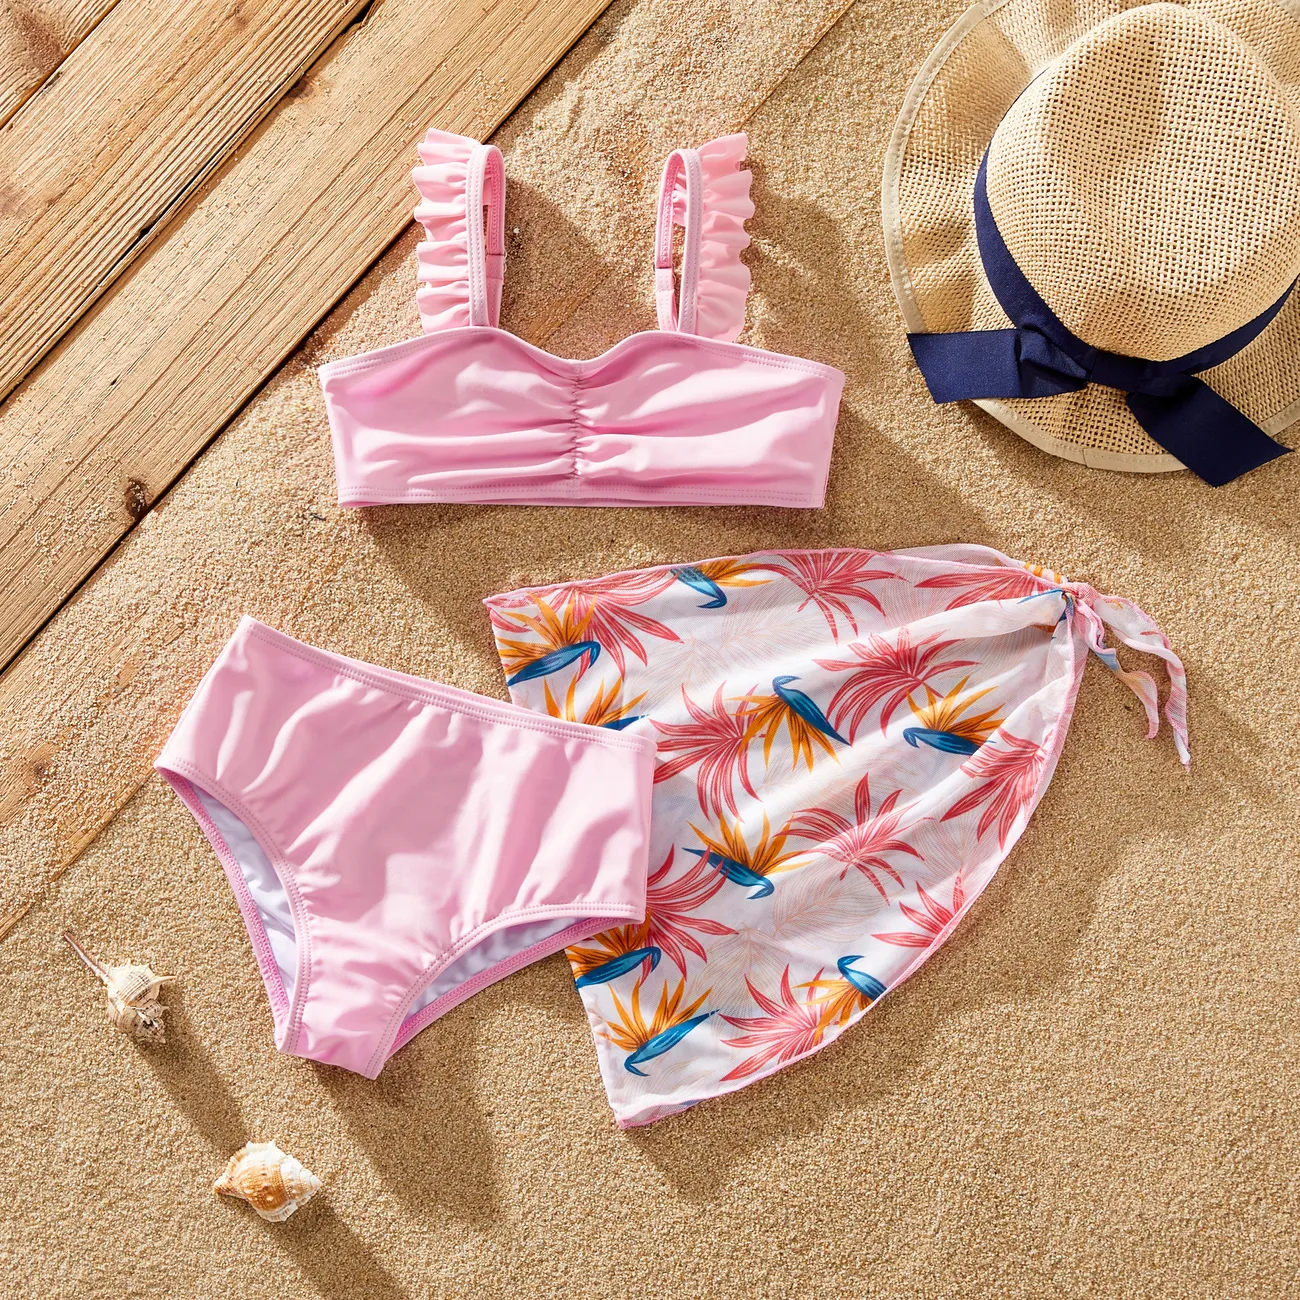 Girl's 3-Piece Ruffle Edge Swimsuit Set - Tropical Floral Print Pink big image 1